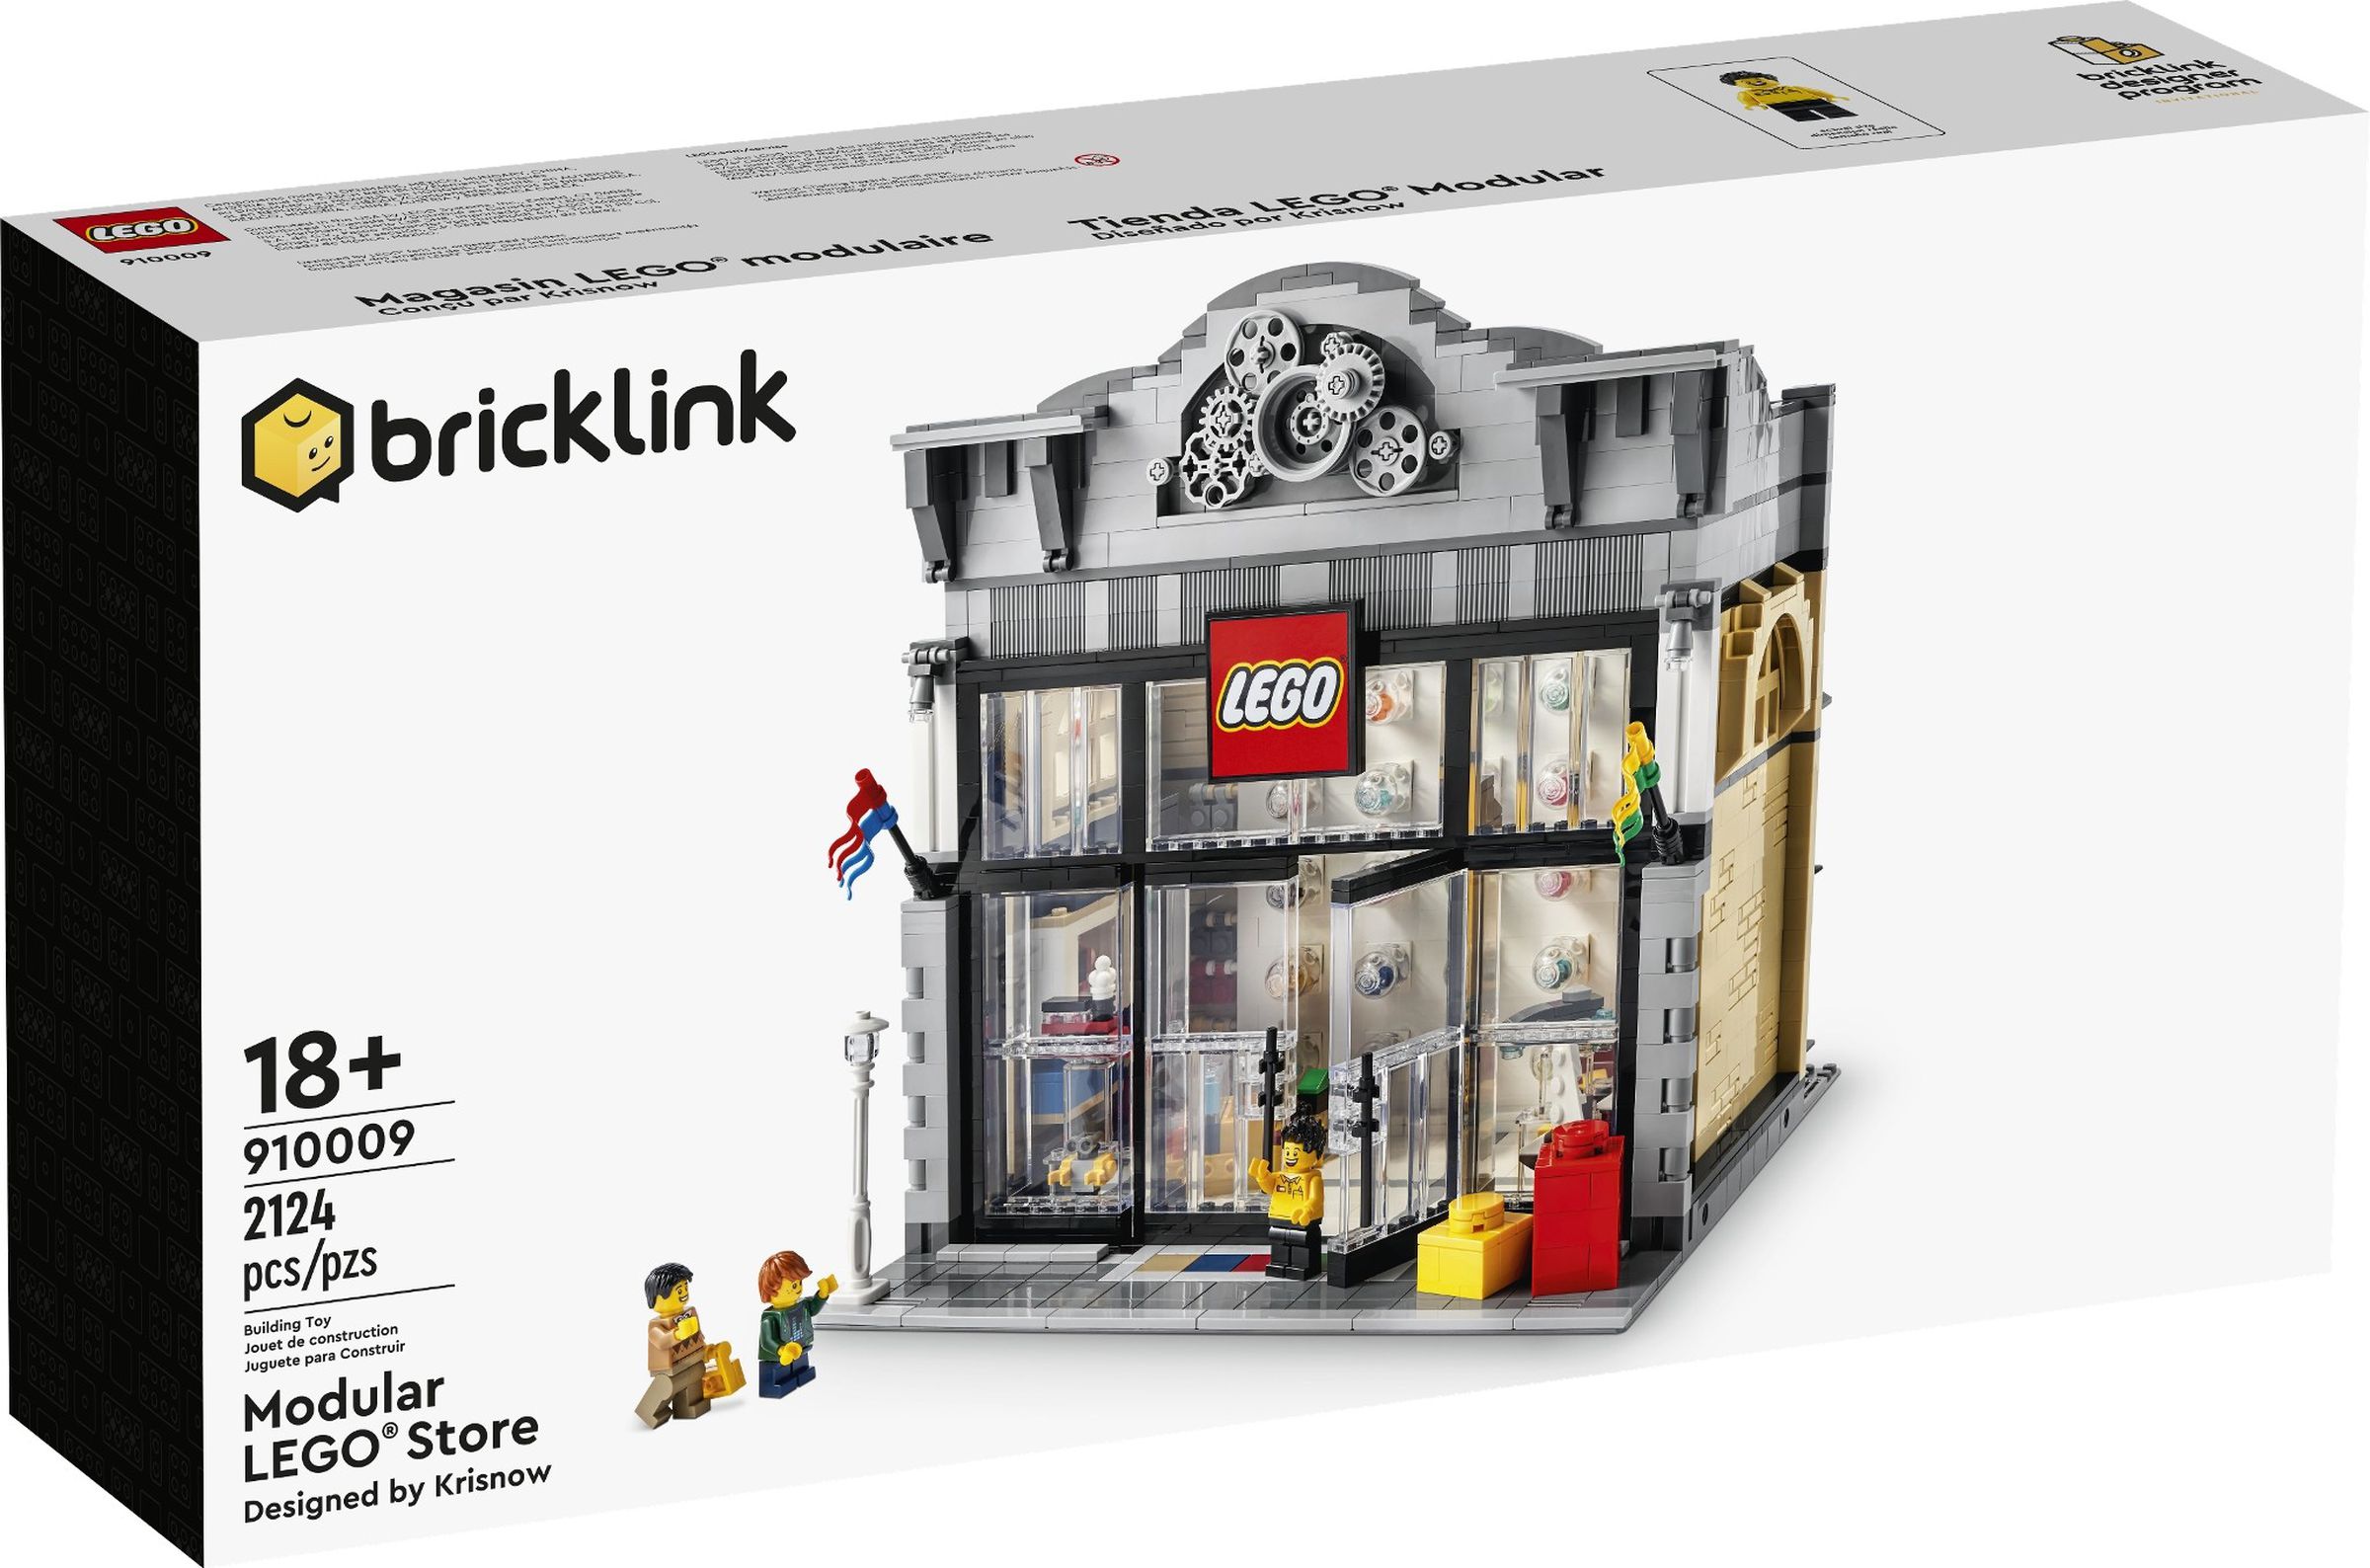 The Modular Lego Store in its Bricklink box, from an earlier competition.